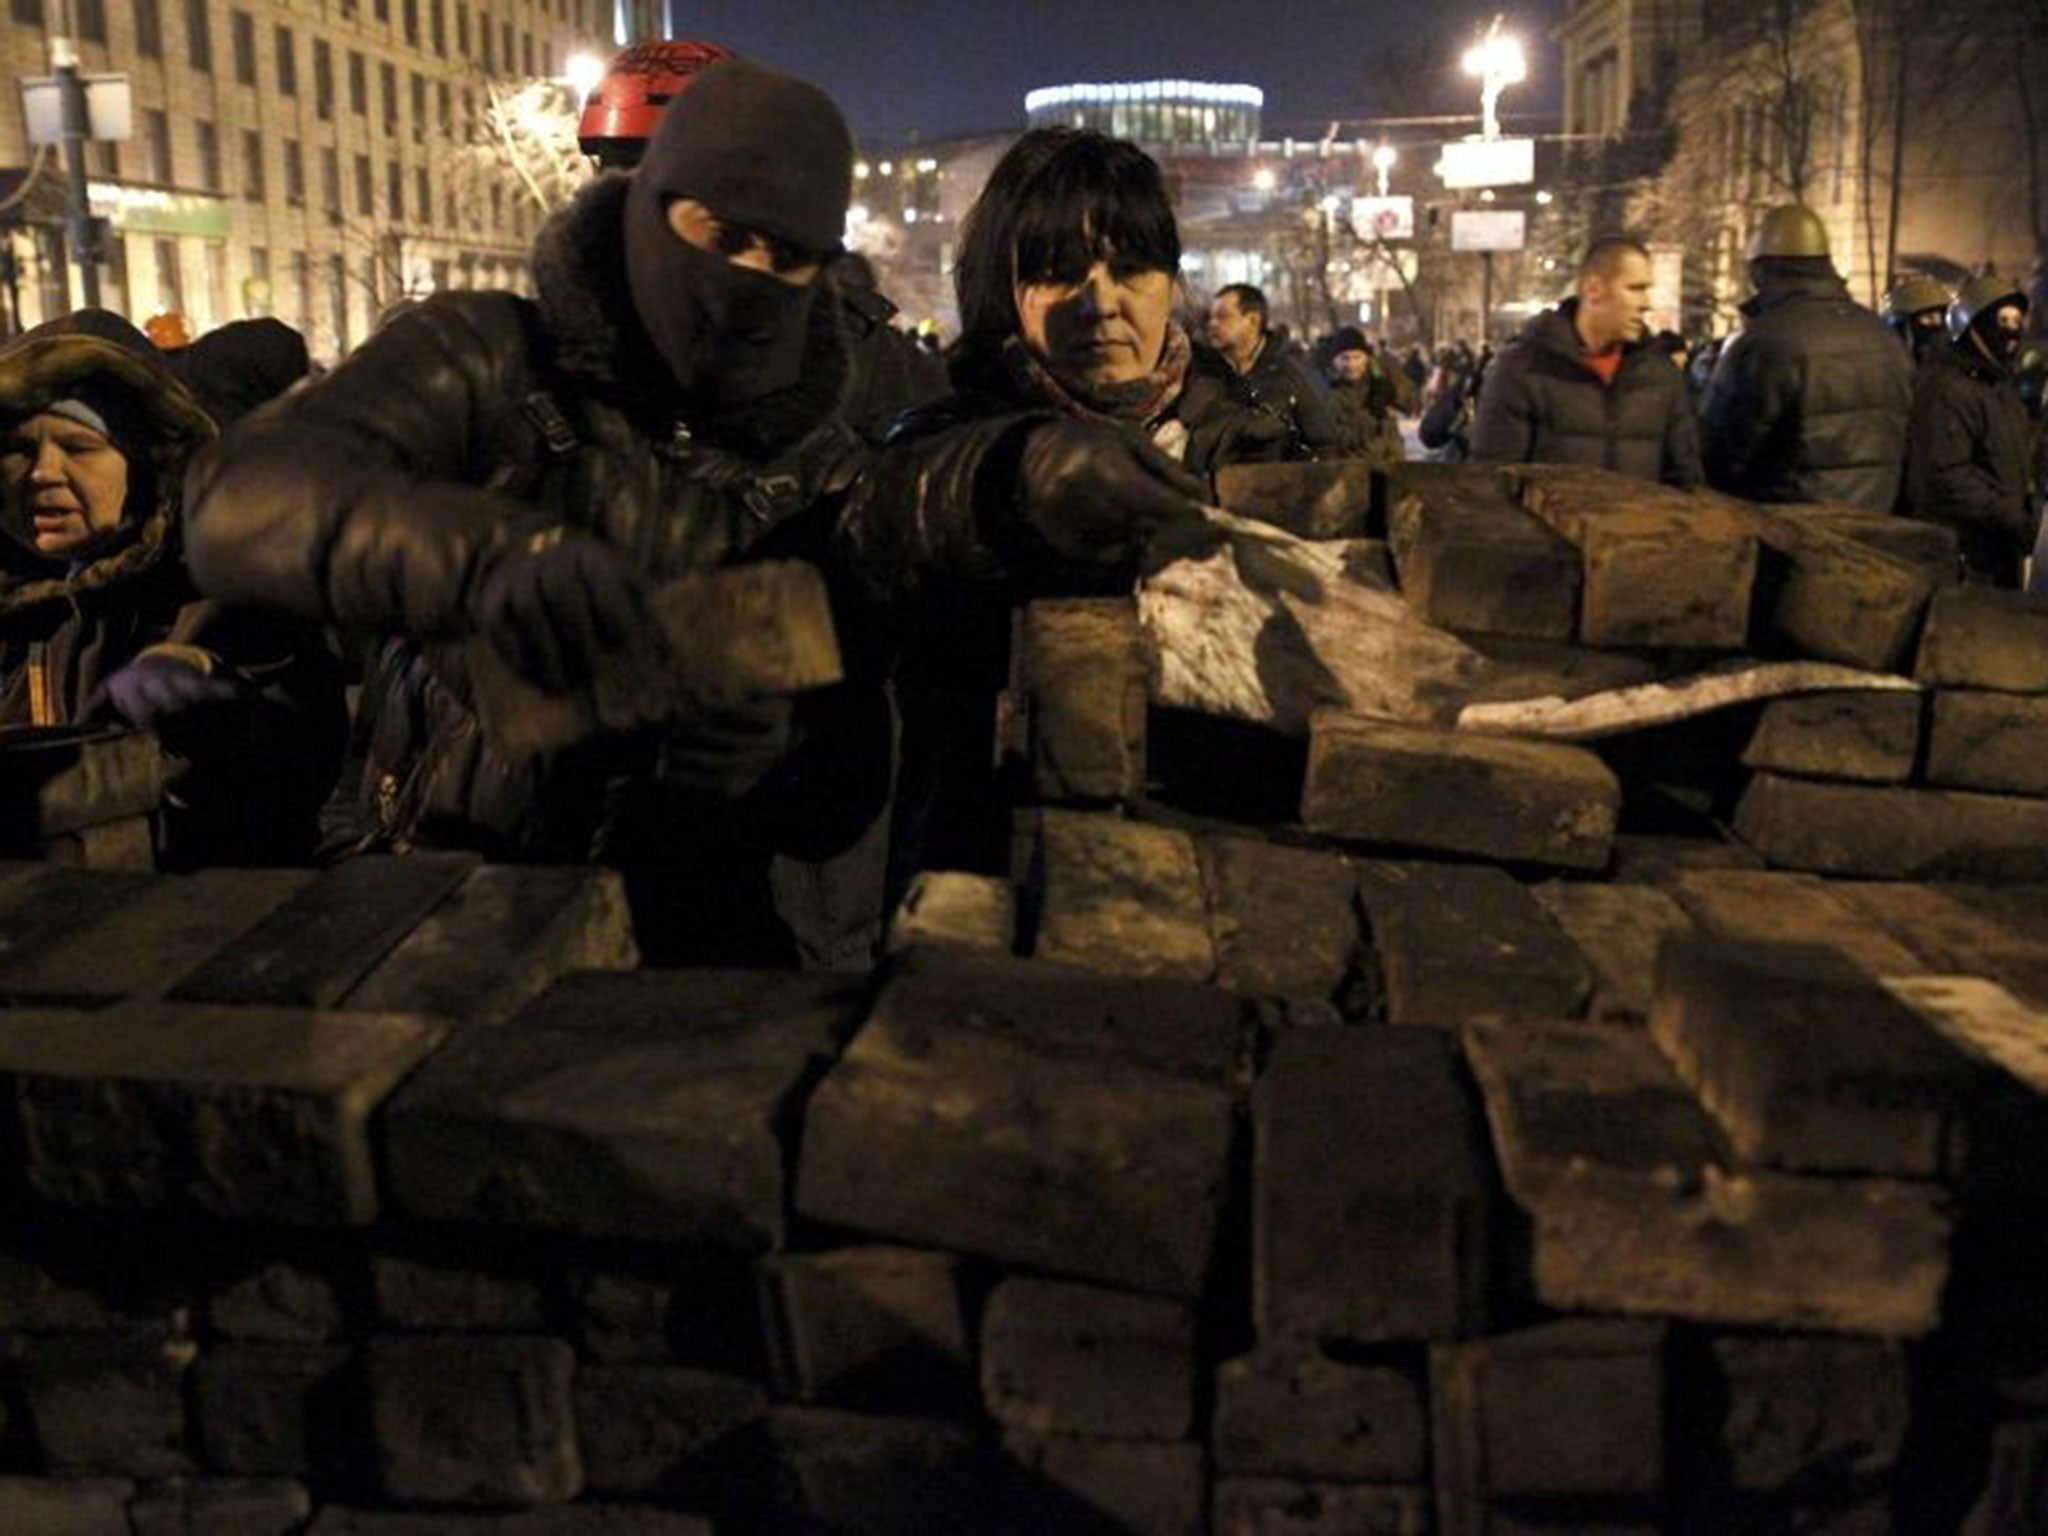 Opposition protesters build barricades overnight